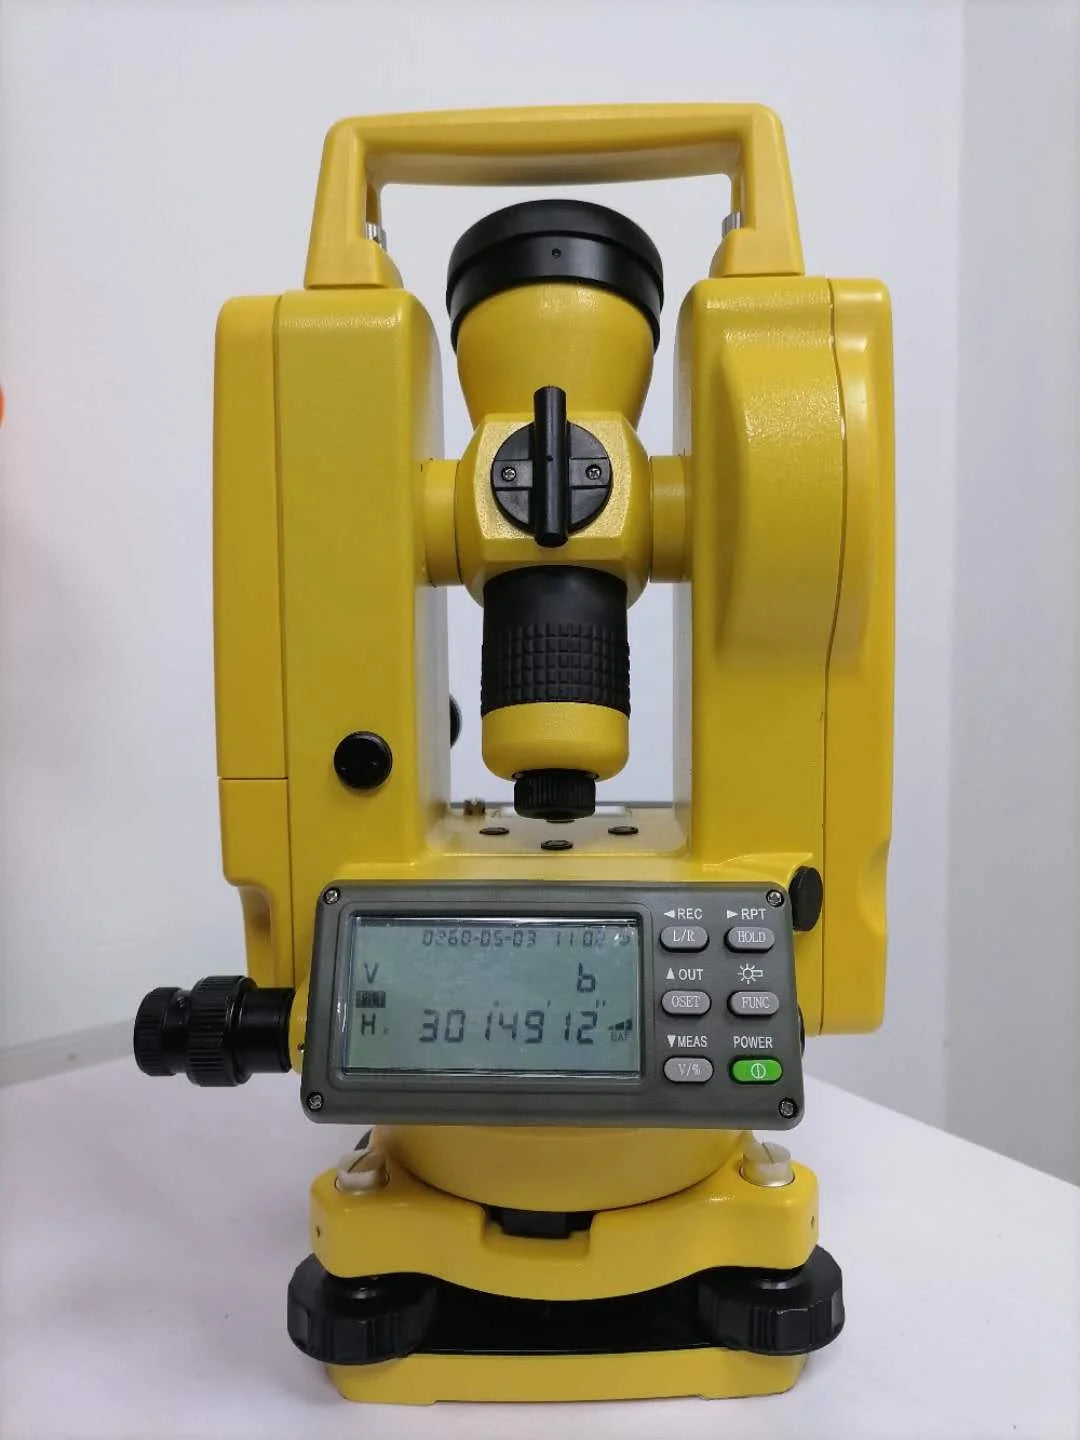 New 2023 In Stock Digital theodolite SOUTH ET02 Electronic theodolites total station Surveying Instrument